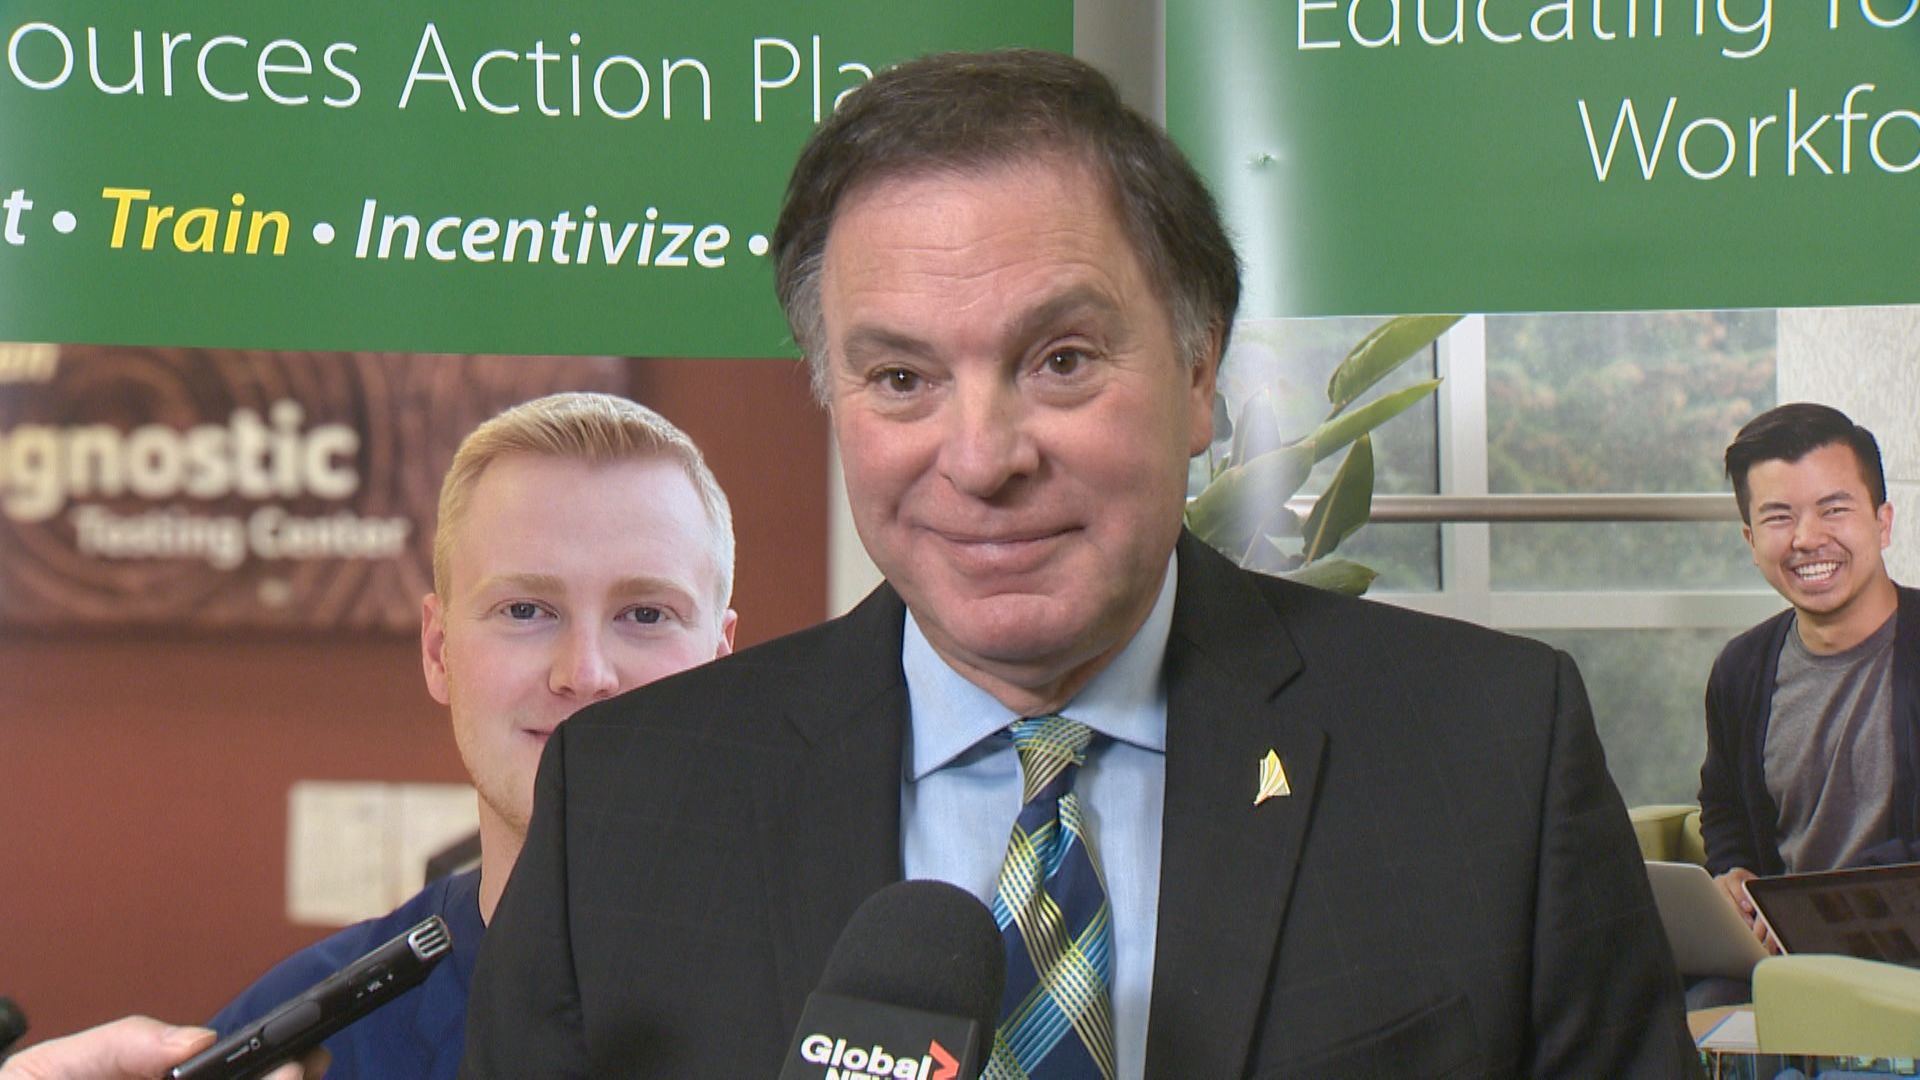 Saskatchewan students will have more opportunities to access health science programs